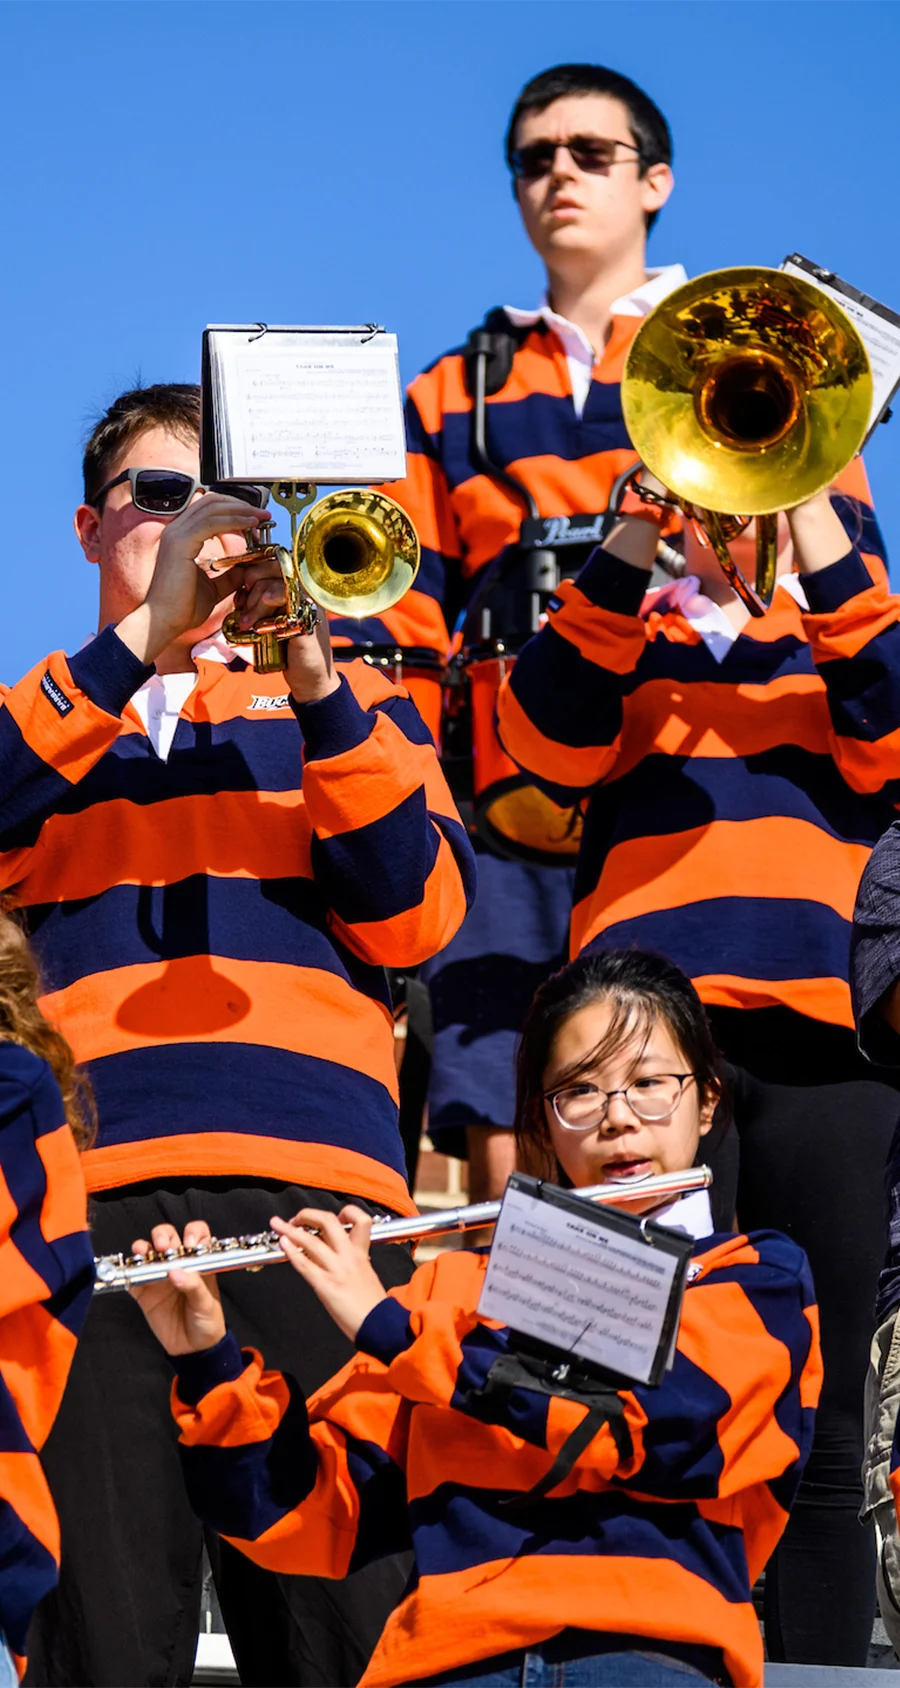 members of the Bison Band playing instruments